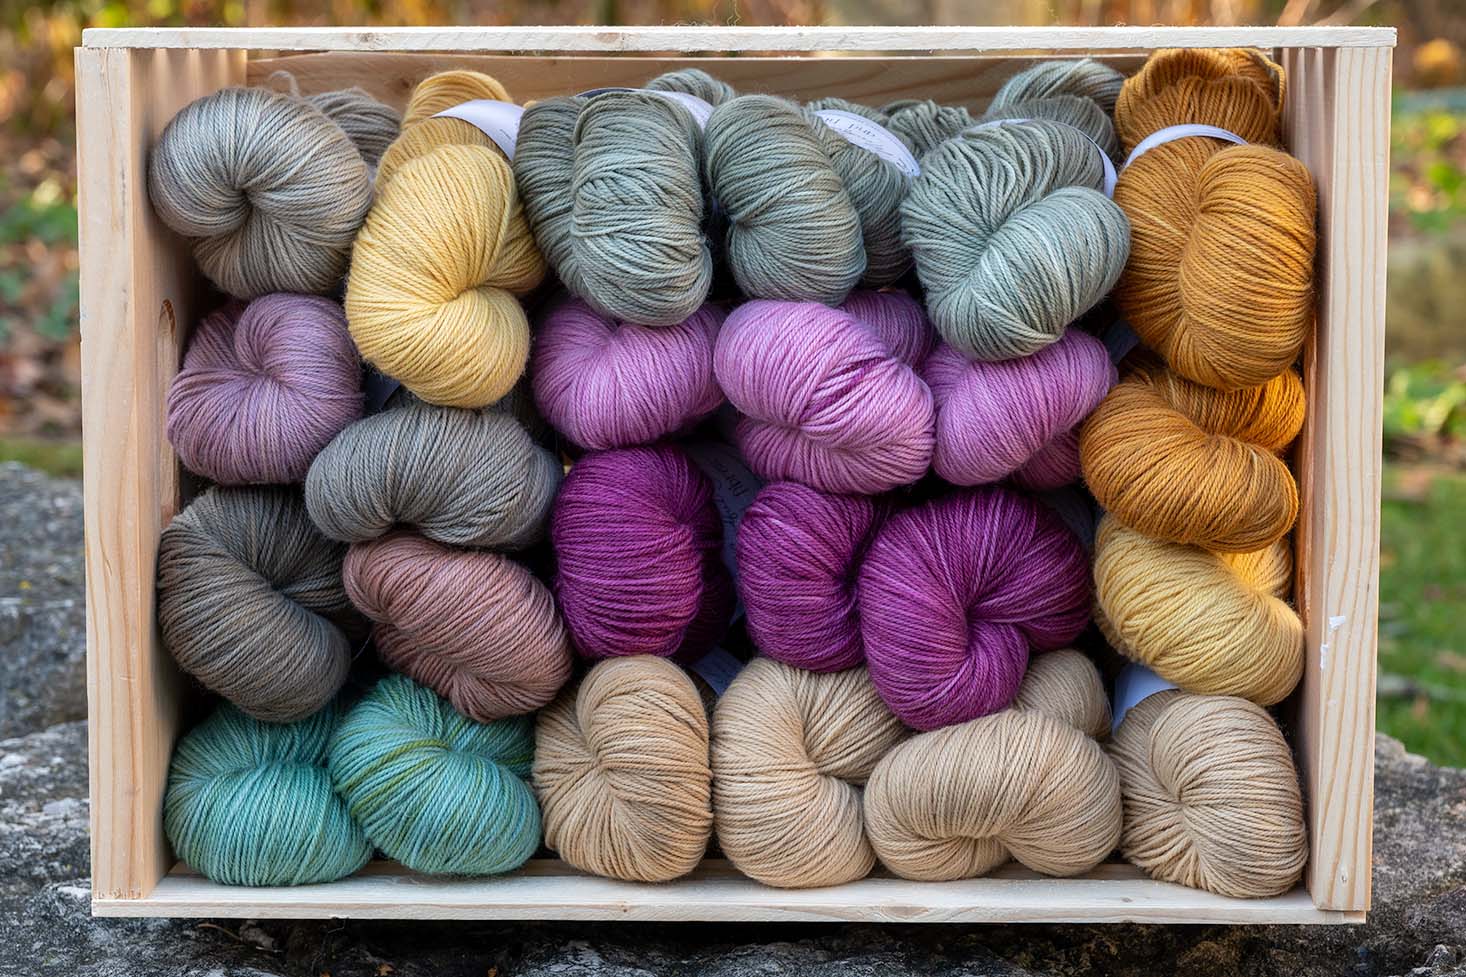 A collection of naturally dyed wool yarn in a wooden crate outside on a fall day in Ontario Canada